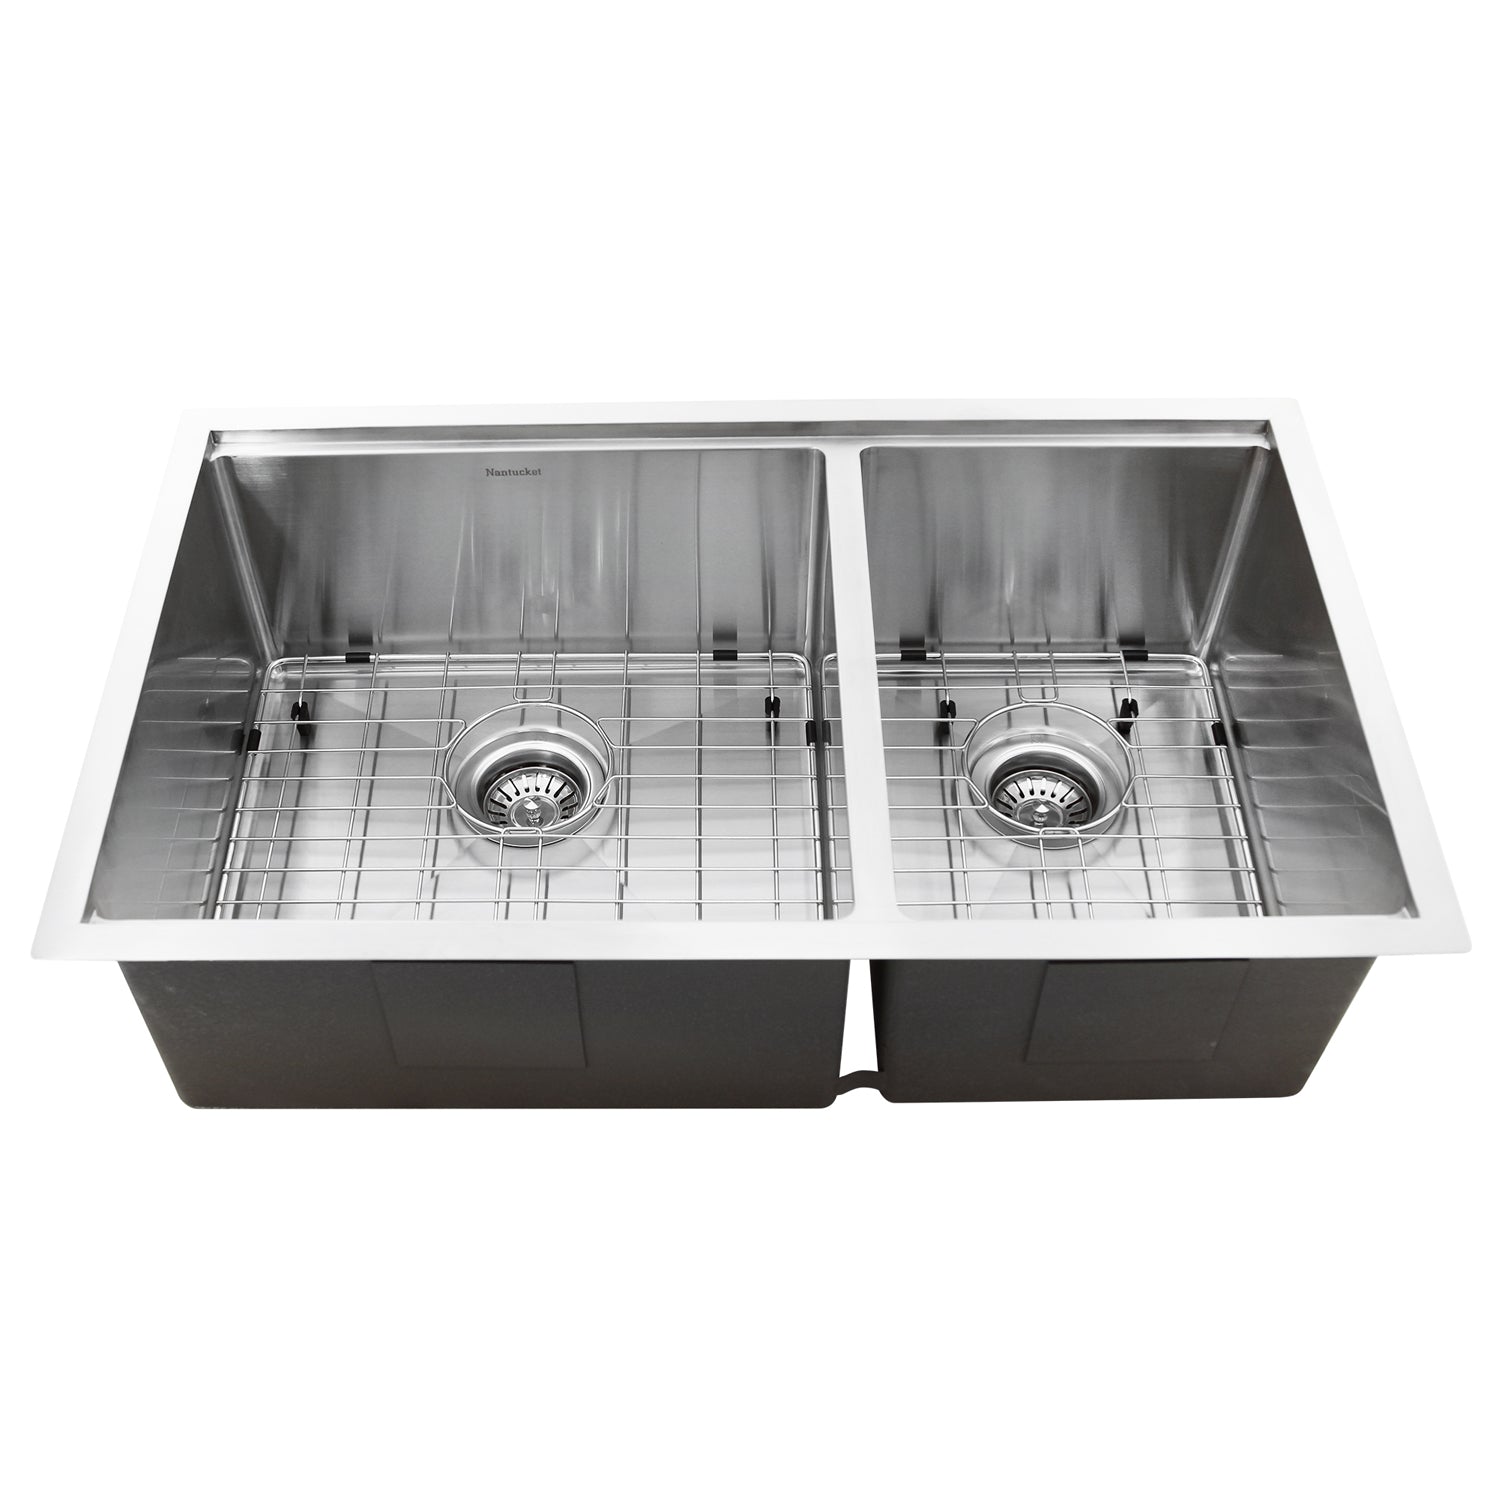 Nantucket Sinks SR-PS-3219-OS-16 Offset Double Bowl Workstation Small Radius Undermount Stainless Sink with Accessories